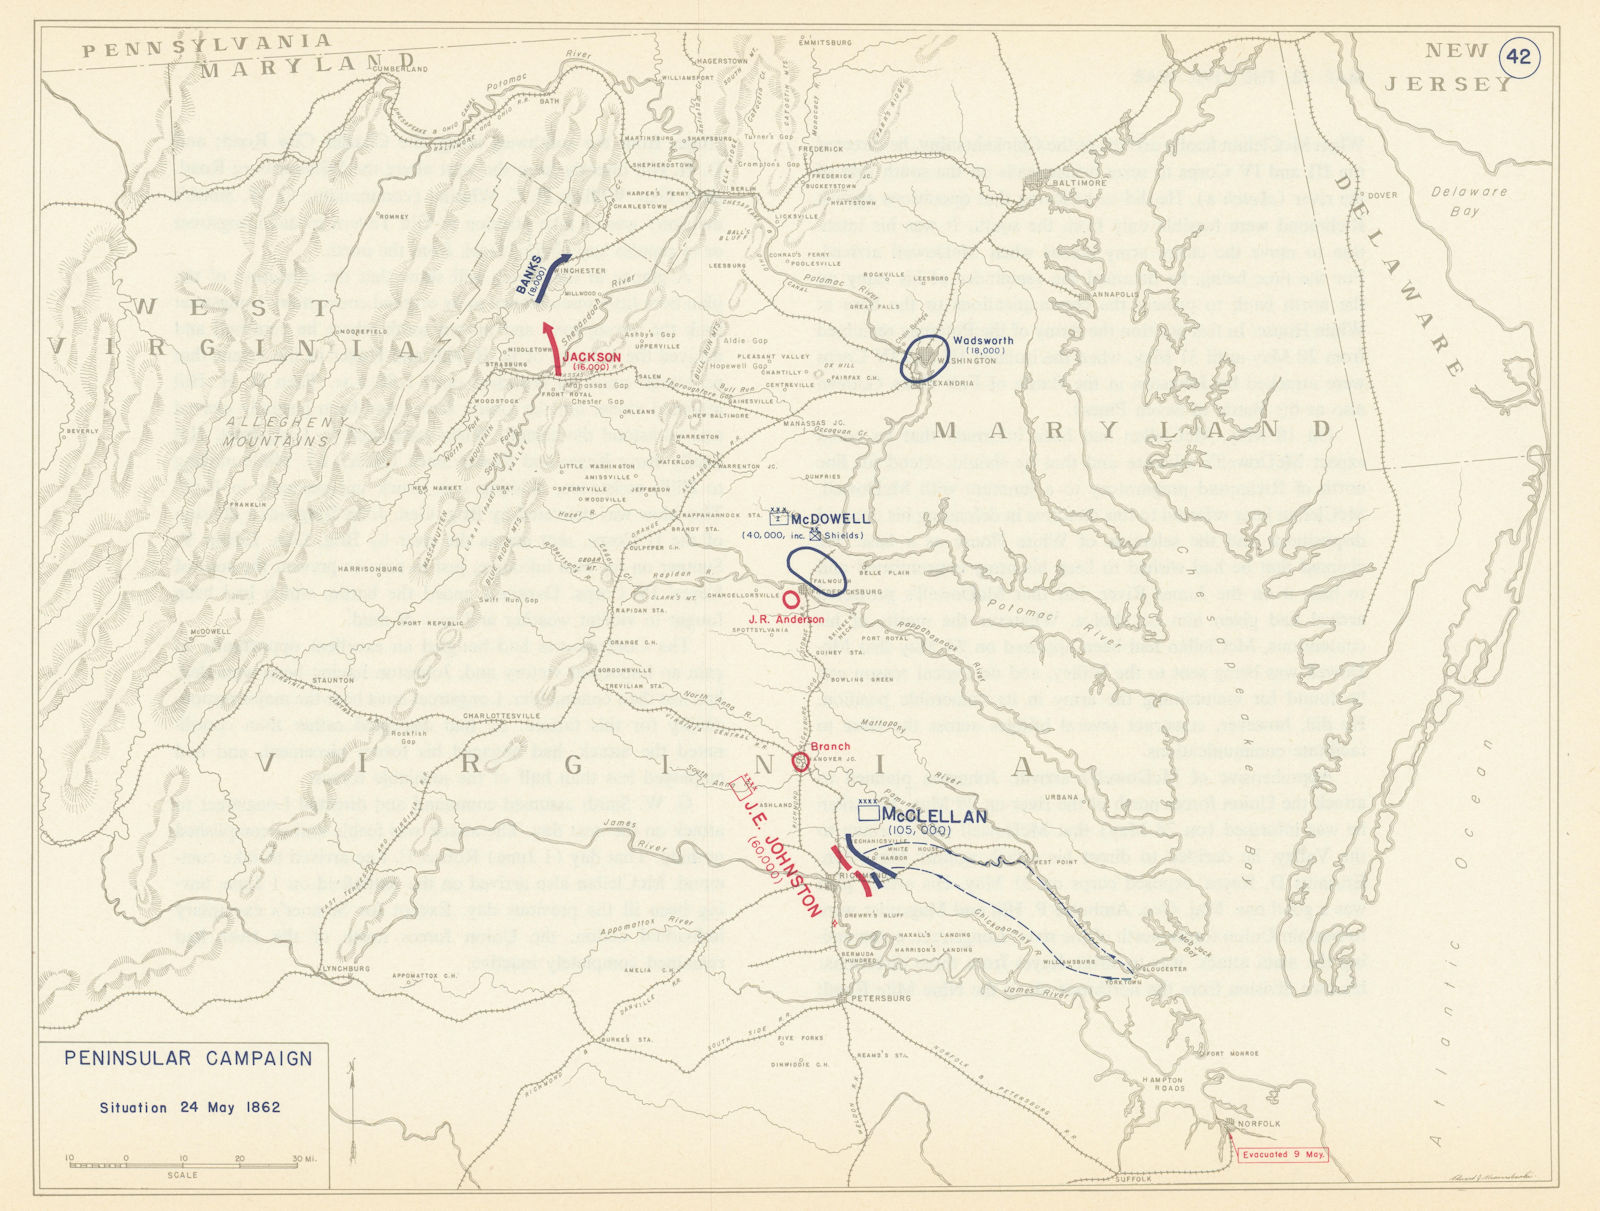 American Civil War. Situation 24 May 1862. Peninsular Campaign 1959 old map